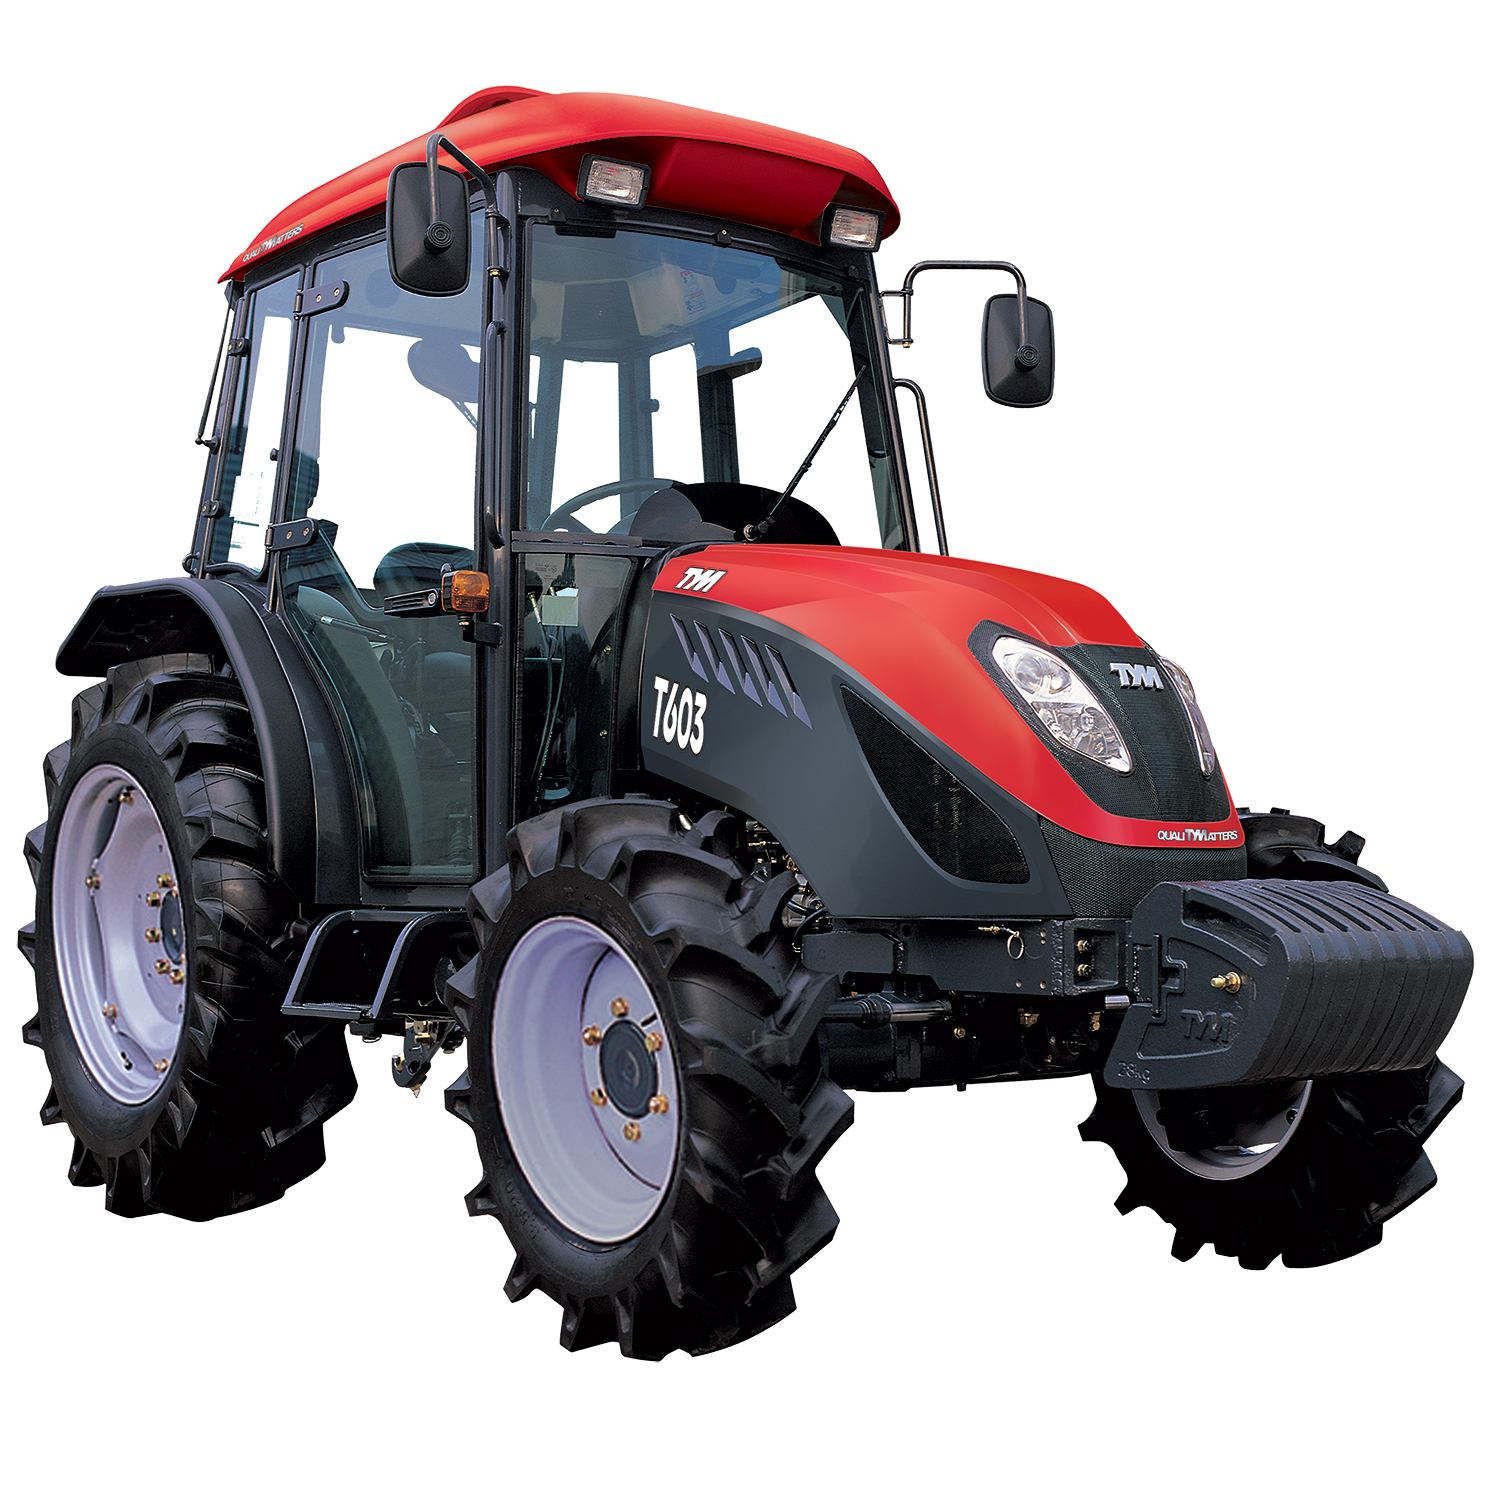 T603 tractor with agricultural tires and a heated air conditioned ...